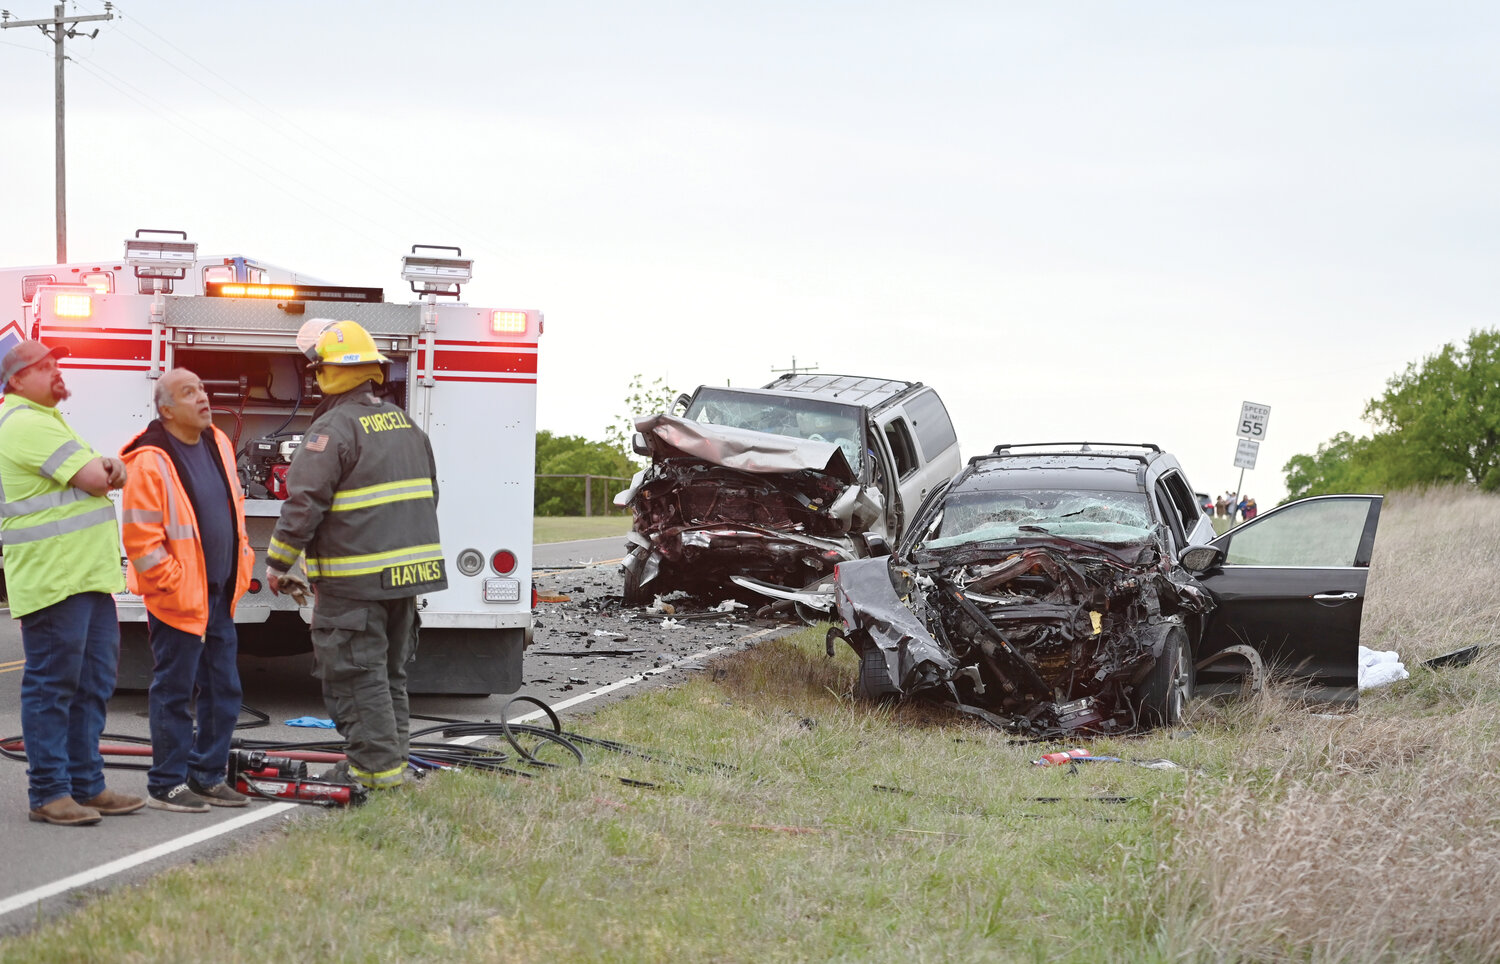 A three-vehicle accident near the intersection of Johnson Rd. and 180th St. sent six people to area hospitals Monday evening.